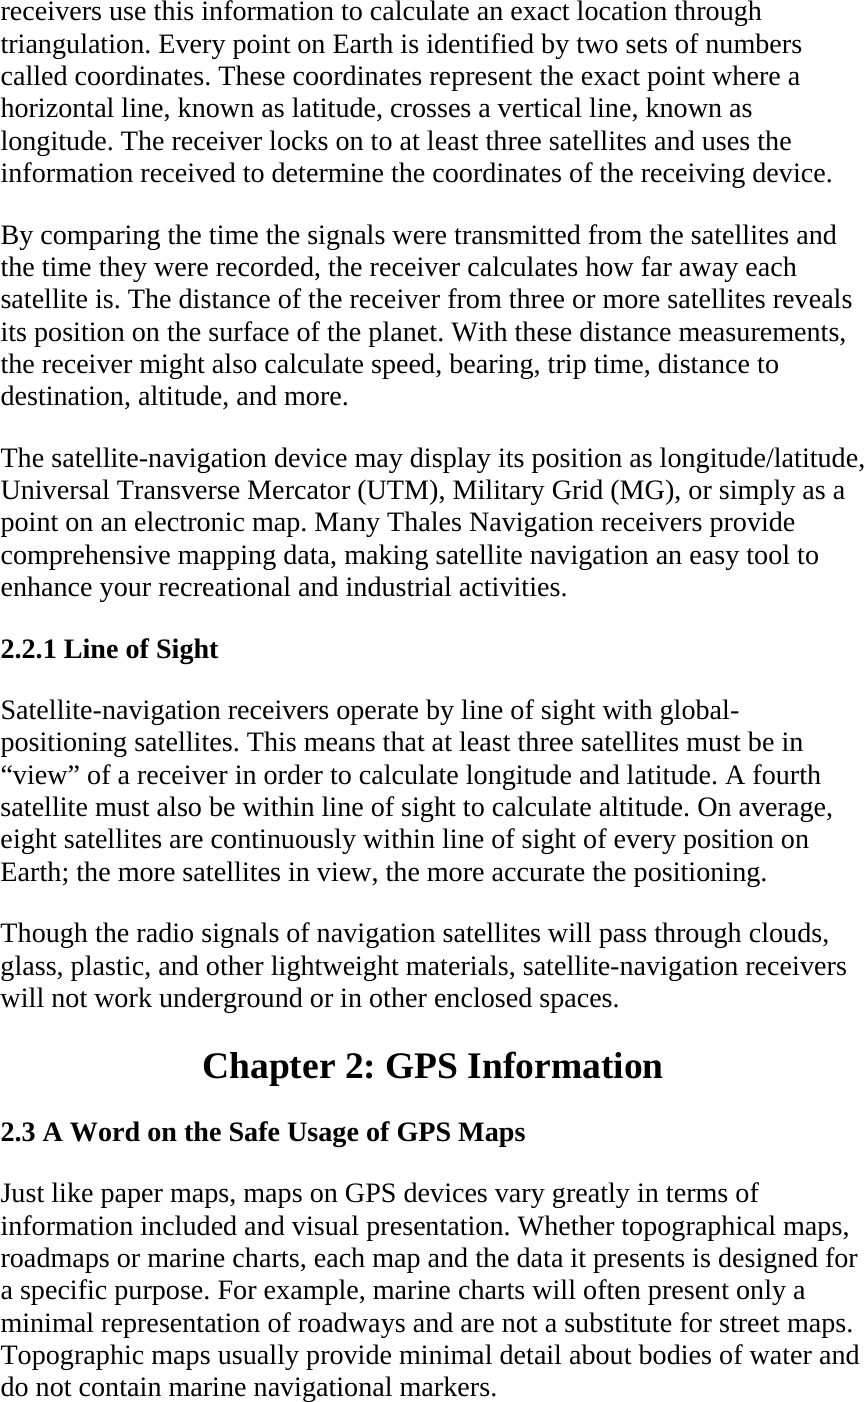 receivers use this information to calculate an exact location through triangulation. Every point on Earth is identified by two sets of numbers called coordinates. These coordinates represent the exact point where a horizontal line, known as latitude, crosses a vertical line, known as longitude. The receiver locks on to at least three satellites and uses the information received to determine the coordinates of the receiving device.  By comparing the time the signals were transmitted from the satellites and the time they were recorded, the receiver calculates how far away each satellite is. The distance of the receiver from three or more satellites reveals its position on the surface of the planet. With these distance measurements, the receiver might also calculate speed, bearing, trip time, distance to destination, altitude, and more.  The satellite-navigation device may display its position as longitude/latitude, Universal Transverse Mercator (UTM), Military Grid (MG), or simply as a point on an electronic map. Many Thales Navigation receivers provide comprehensive mapping data, making satellite navigation an easy tool to enhance your recreational and industrial activities.  2.2.1 Line of Sight  Satellite-navigation receivers operate by line of sight with global-positioning satellites. This means that at least three satellites must be in “view” of a receiver in order to calculate longitude and latitude. A fourth satellite must also be within line of sight to calculate altitude. On average, eight satellites are continuously within line of sight of every position on Earth; the more satellites in view, the more accurate the positioning.  Though the radio signals of navigation satellites will pass through clouds, glass, plastic, and other lightweight materials, satellite-navigation receivers will not work underground or in other enclosed spaces.  Chapter 2: GPS Information  2.3 A Word on the Safe Usage of GPS Maps  Just like paper maps, maps on GPS devices vary greatly in terms of information included and visual presentation. Whether topographical maps, roadmaps or marine charts, each map and the data it presents is designed for a specific purpose. For example, marine charts will often present only a minimal representation of roadways and are not a substitute for street maps. Topographic maps usually provide minimal detail about bodies of water and do not contain marine navigational markers.  